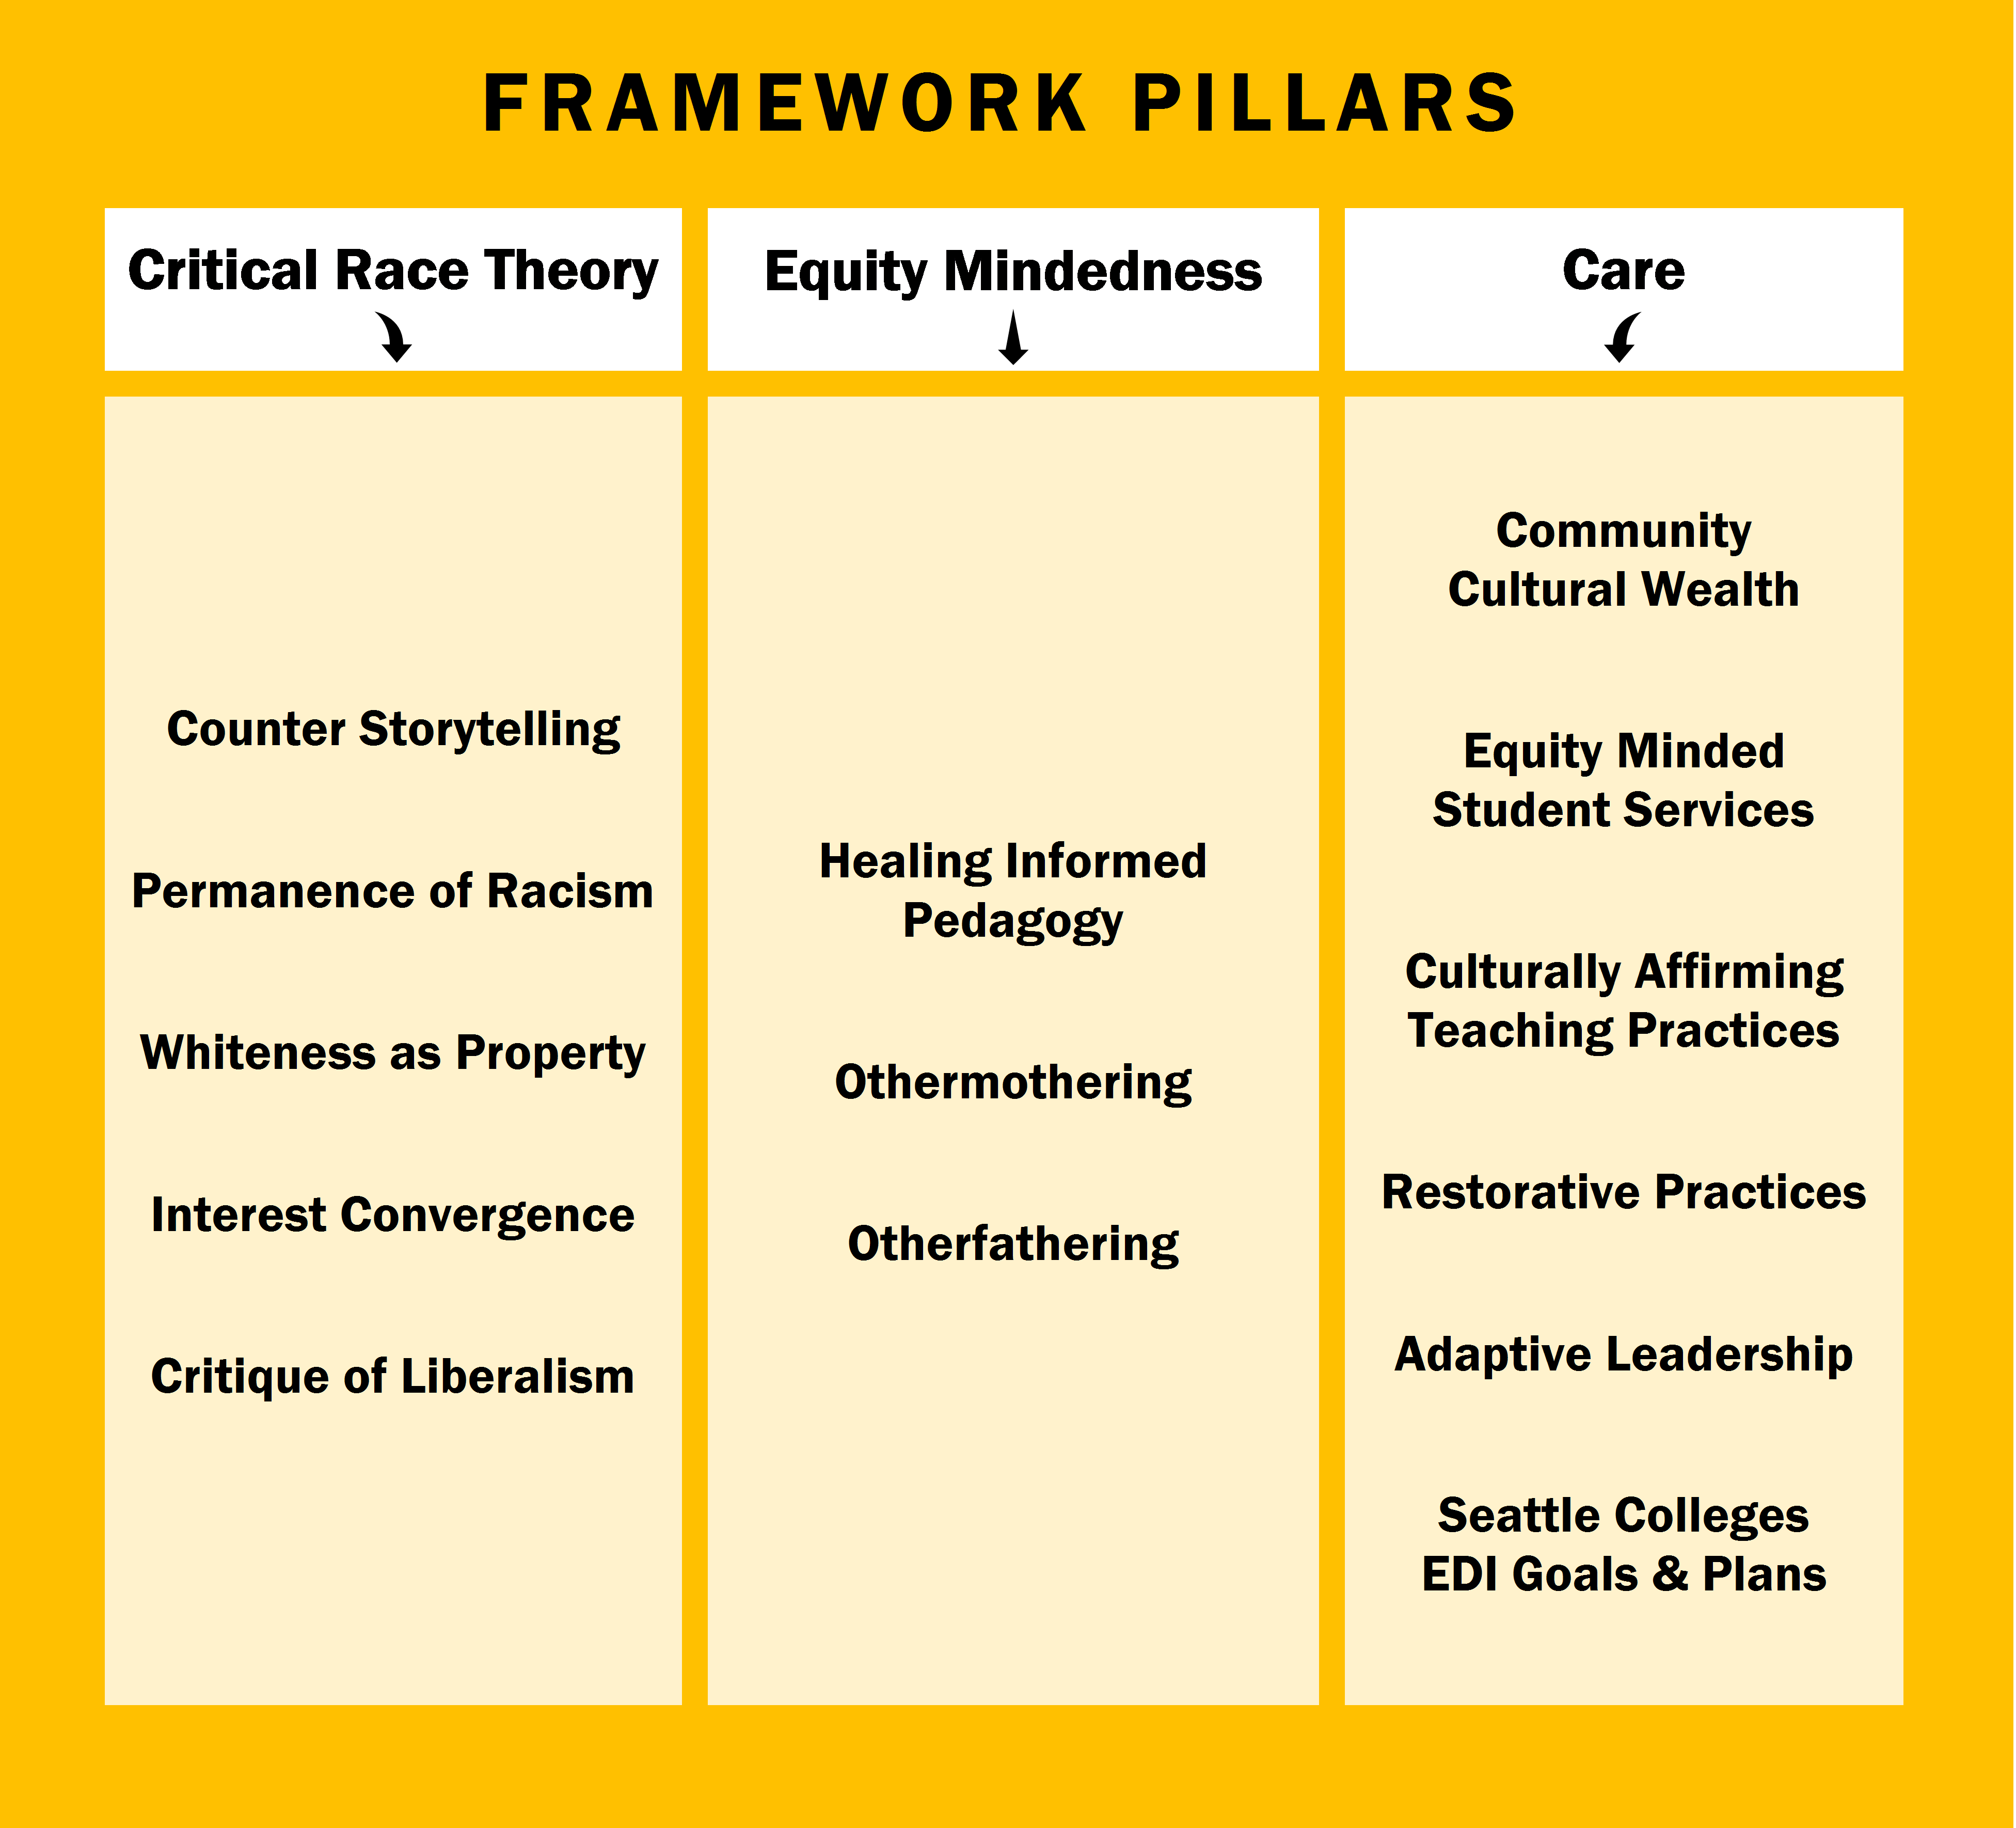 Image Description - Title: Framework Pillars - 3 light yellow columns framed in bright yellow with lists in each column titled Critical Race Theory, Equity Mindedness, and Care.